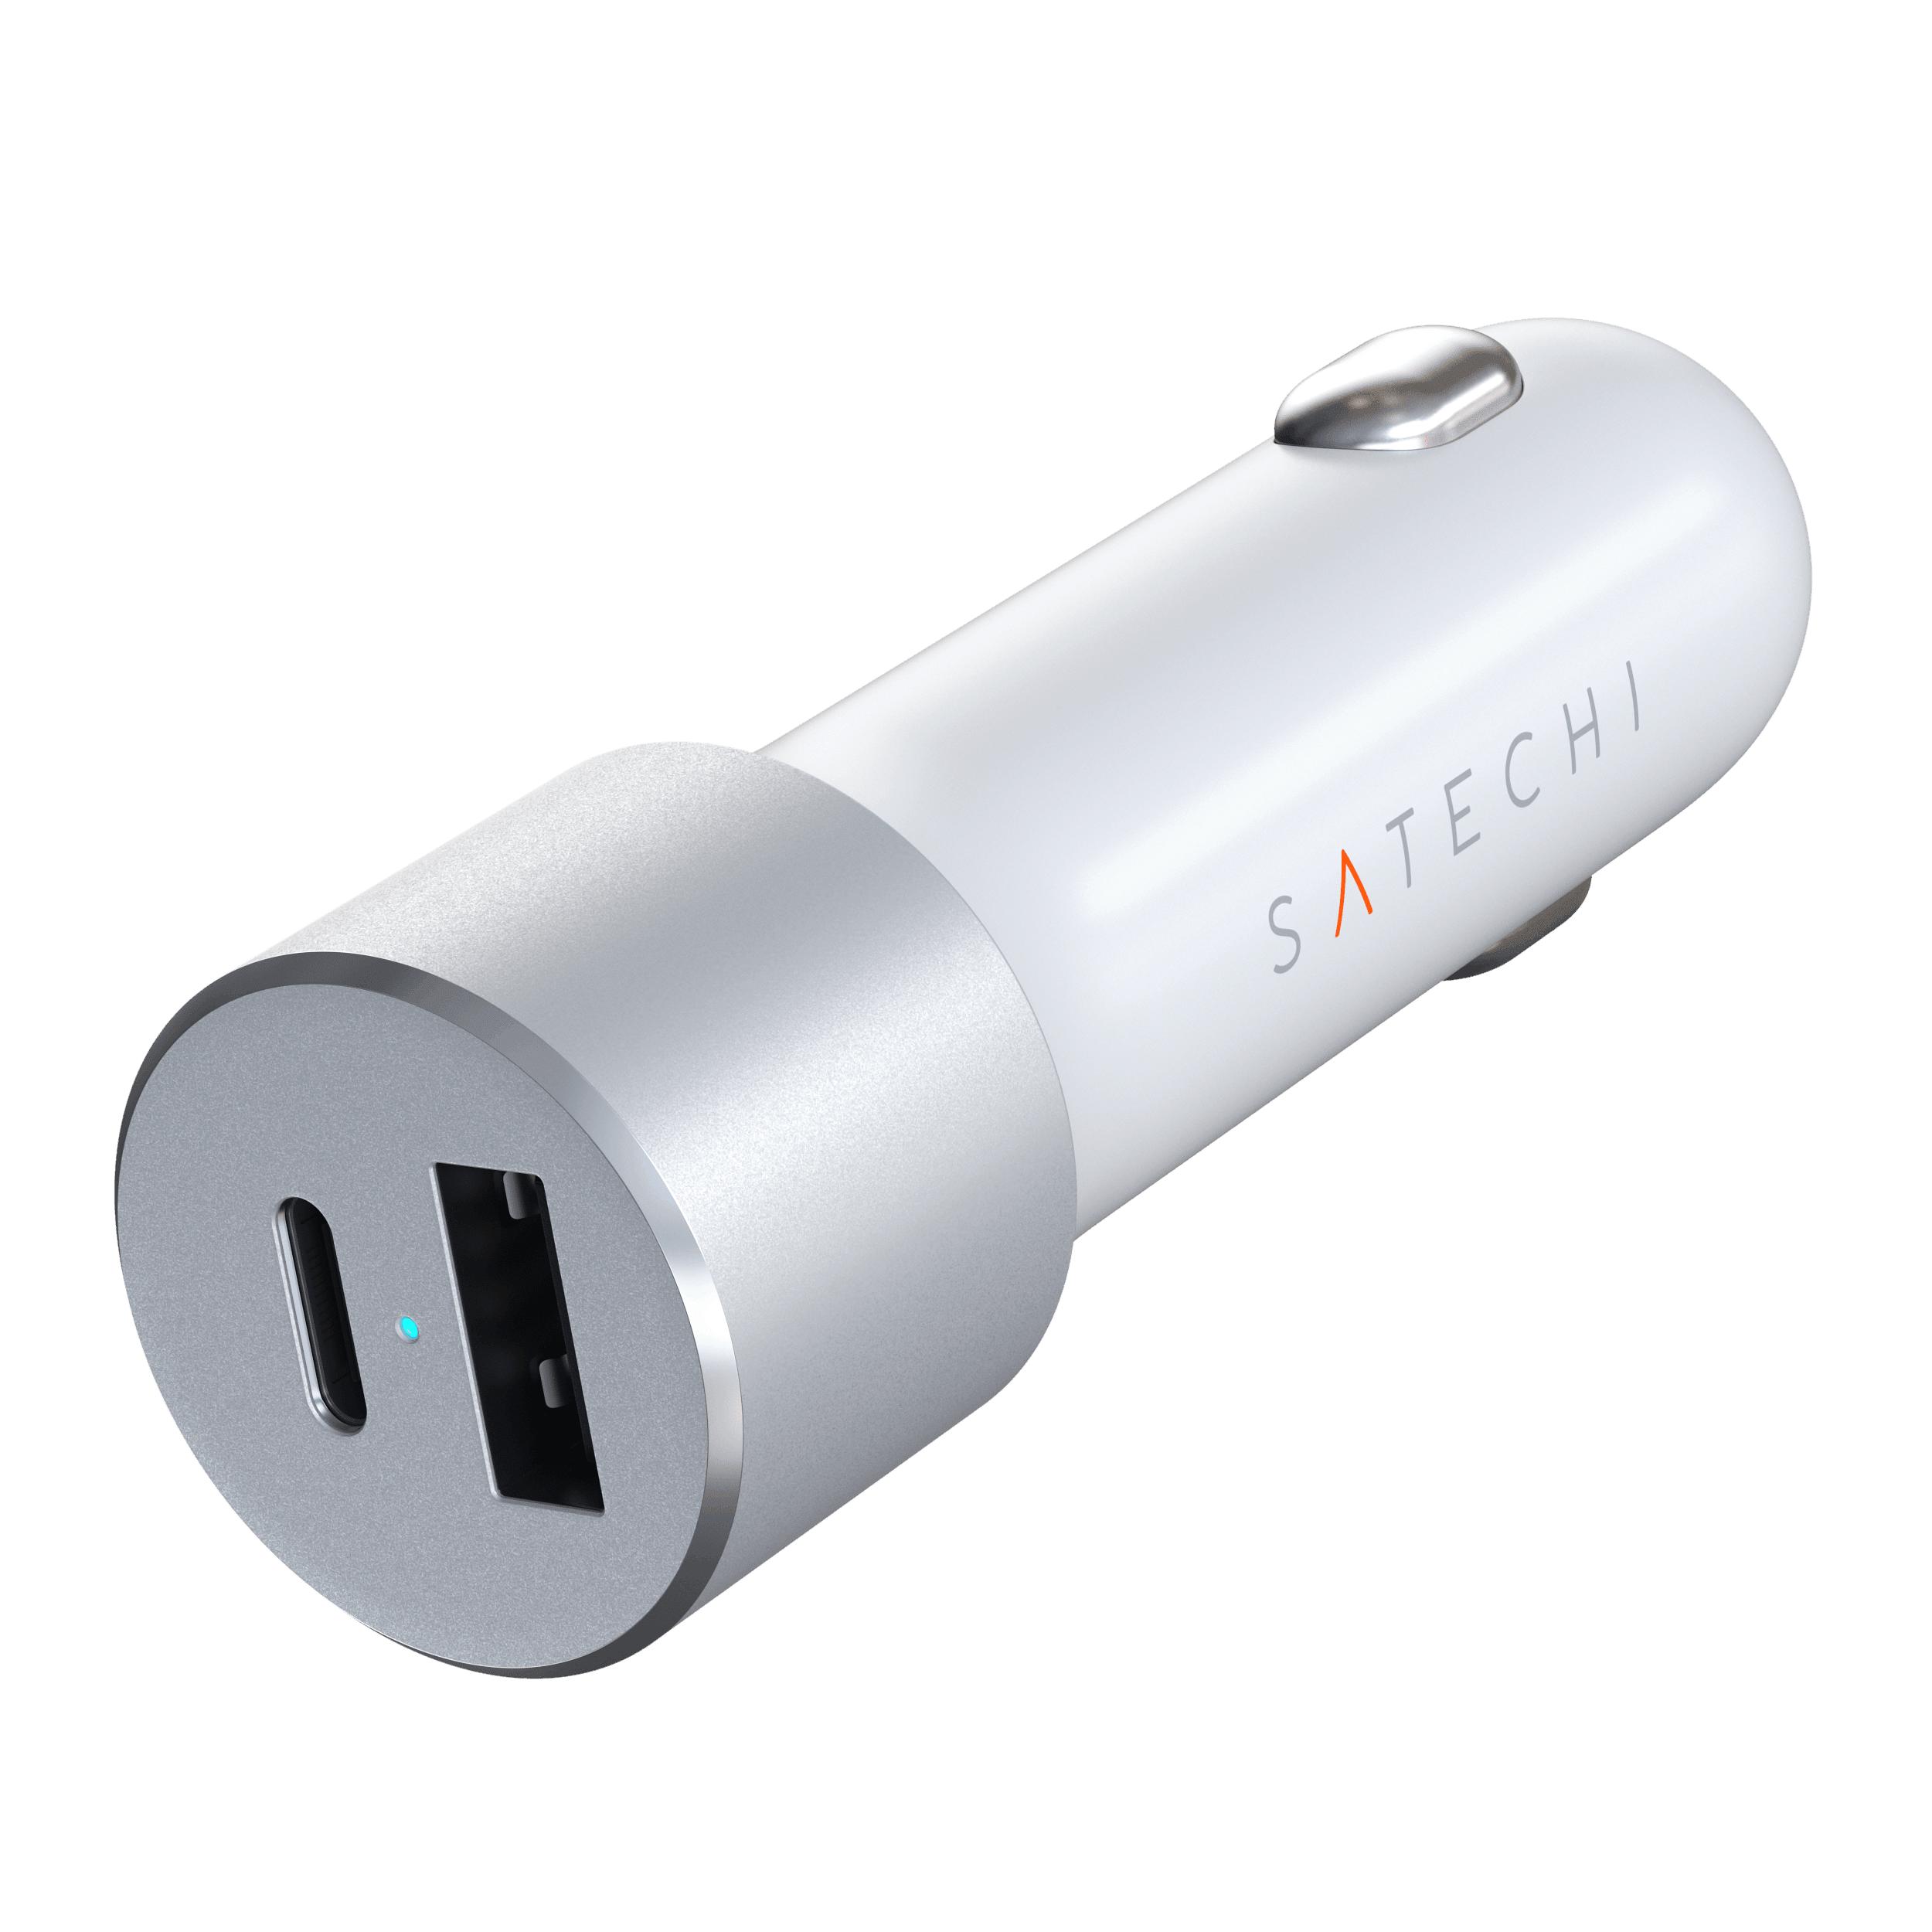 Chargeur allume cigare Satechi USB-C 72 W Gris sidéral - Chargeur